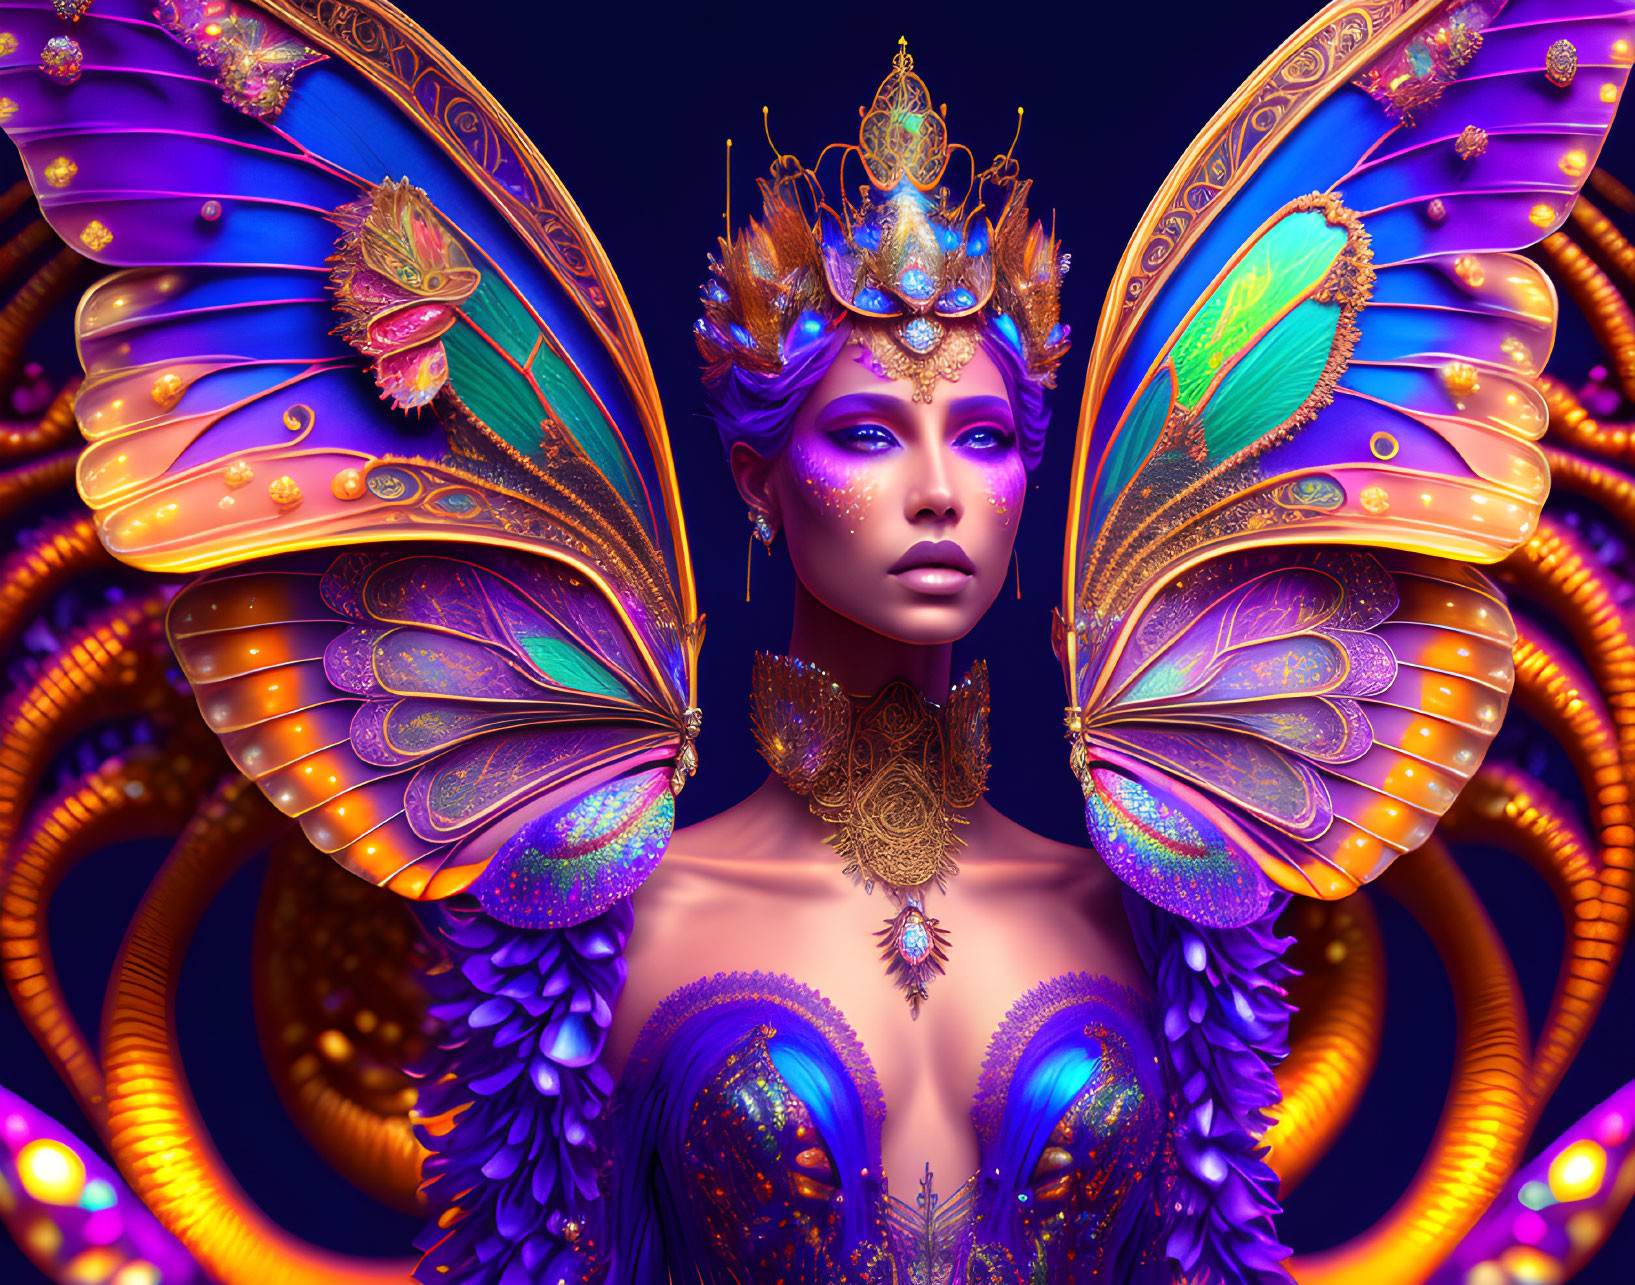 Regal butterfly wings and crown in vibrant digital art